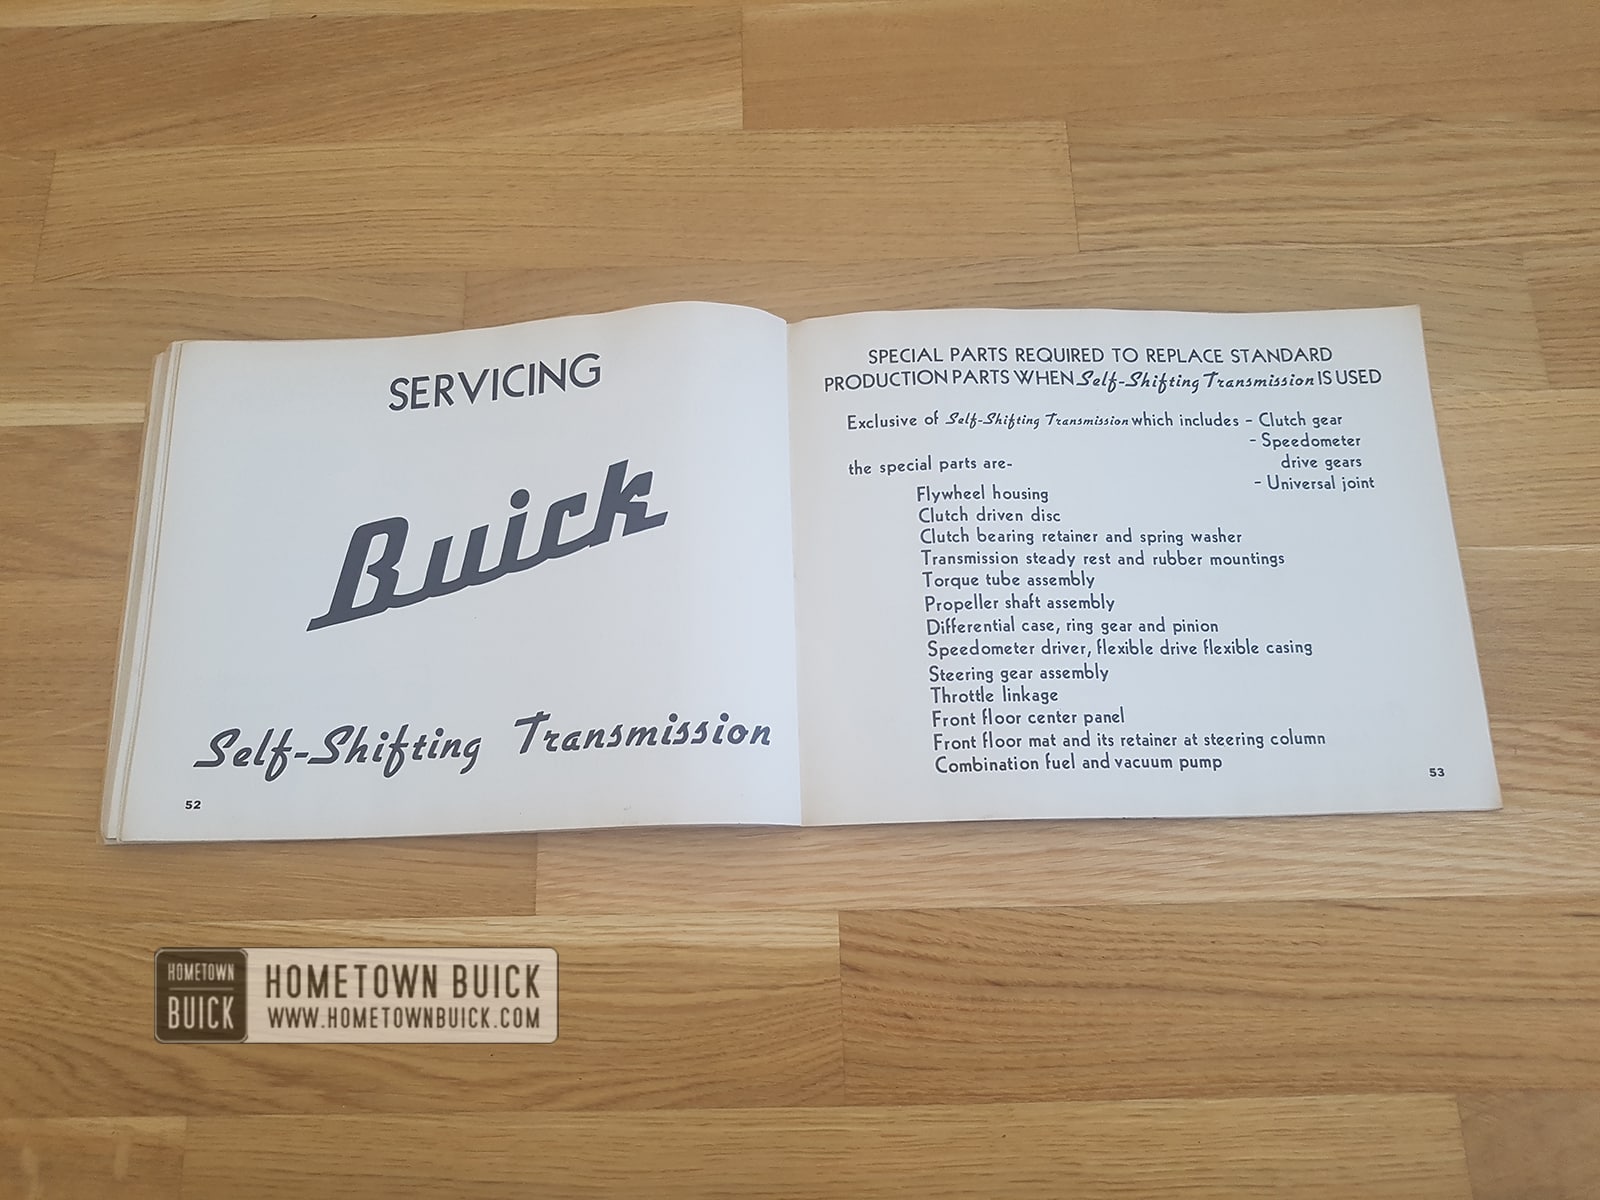 1938 Buick Special Self-Shifting Transmission Shop Manual 2 Service Books in 1